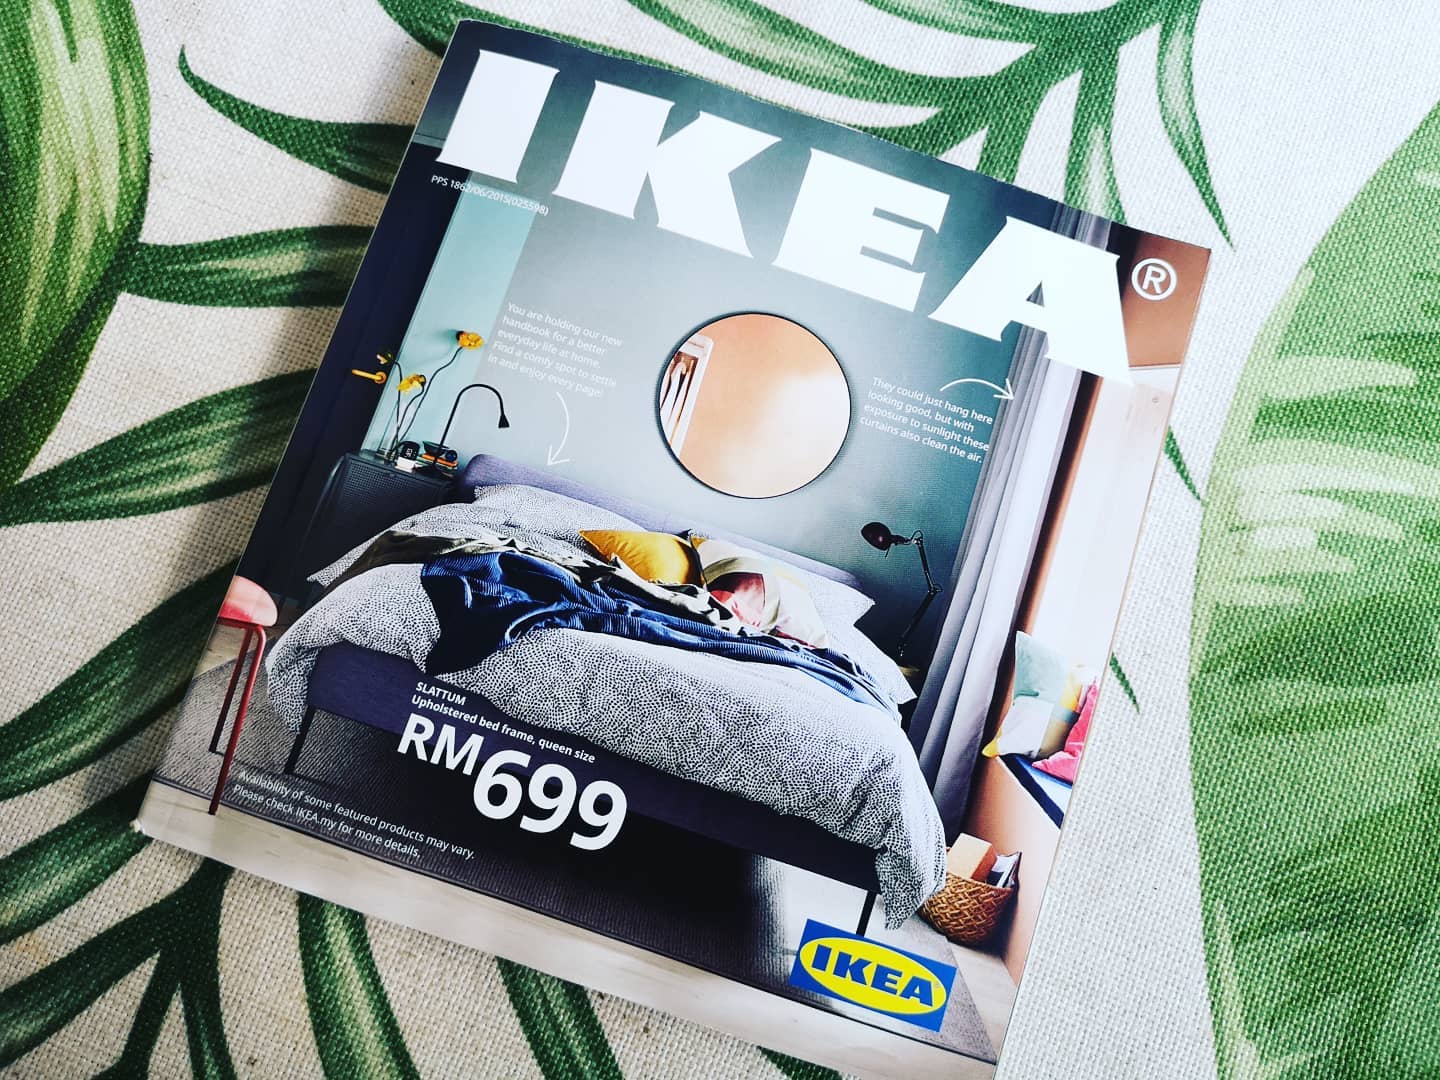 IKEA 2021 Catalogue Presents Malaysians with Affordable Home Furnishing Solutions